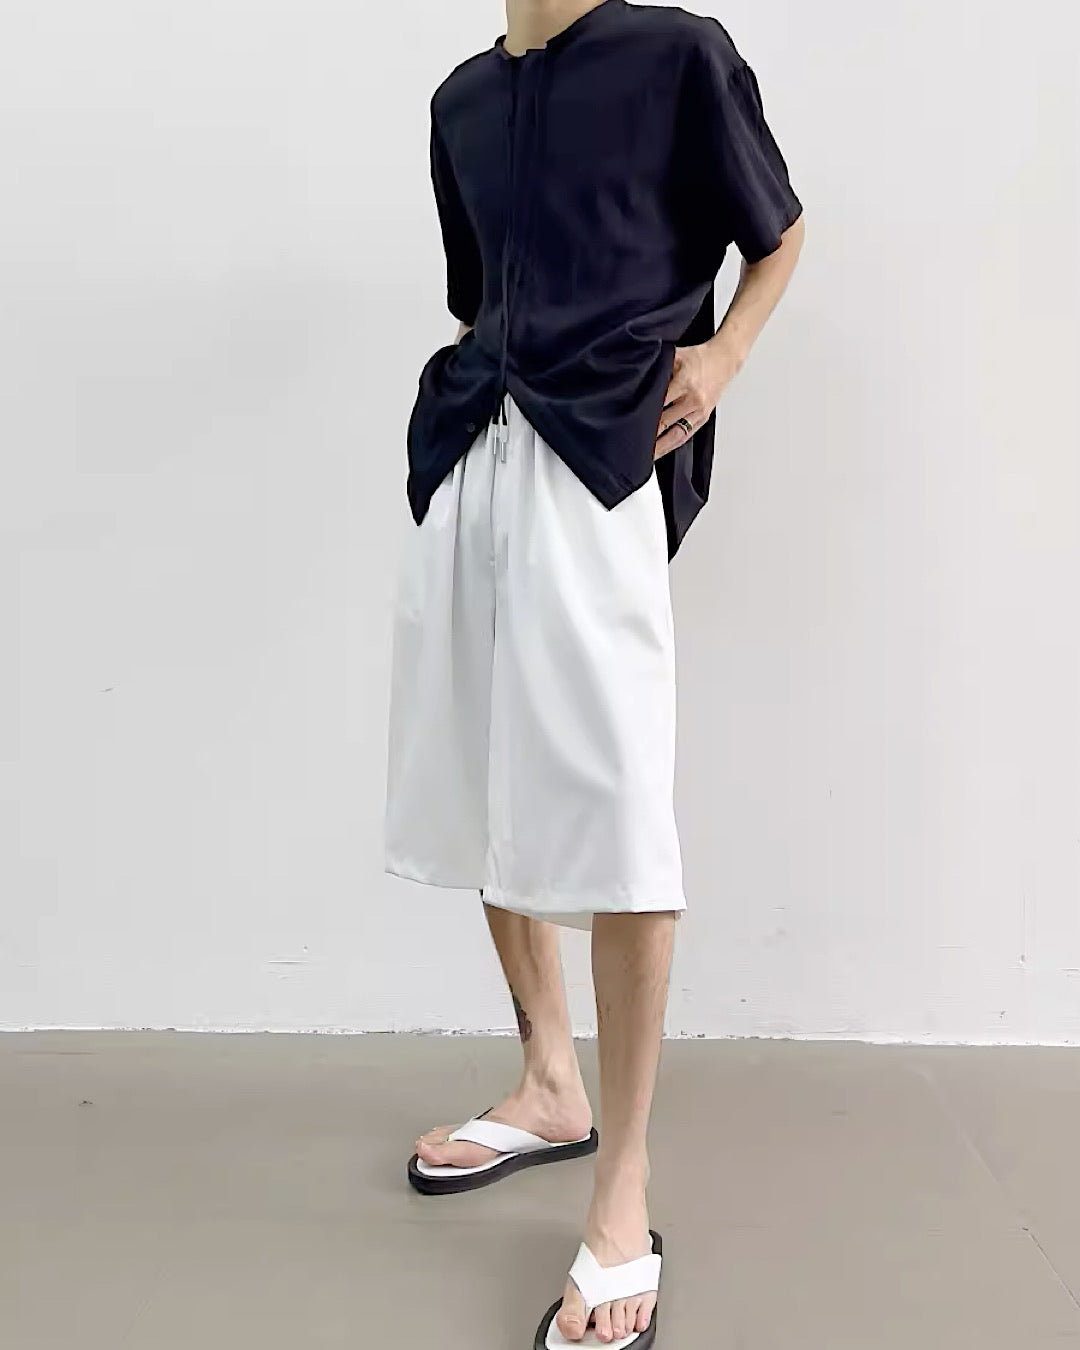 【Yghome】Simple rayon type simple casual shirt YH0007